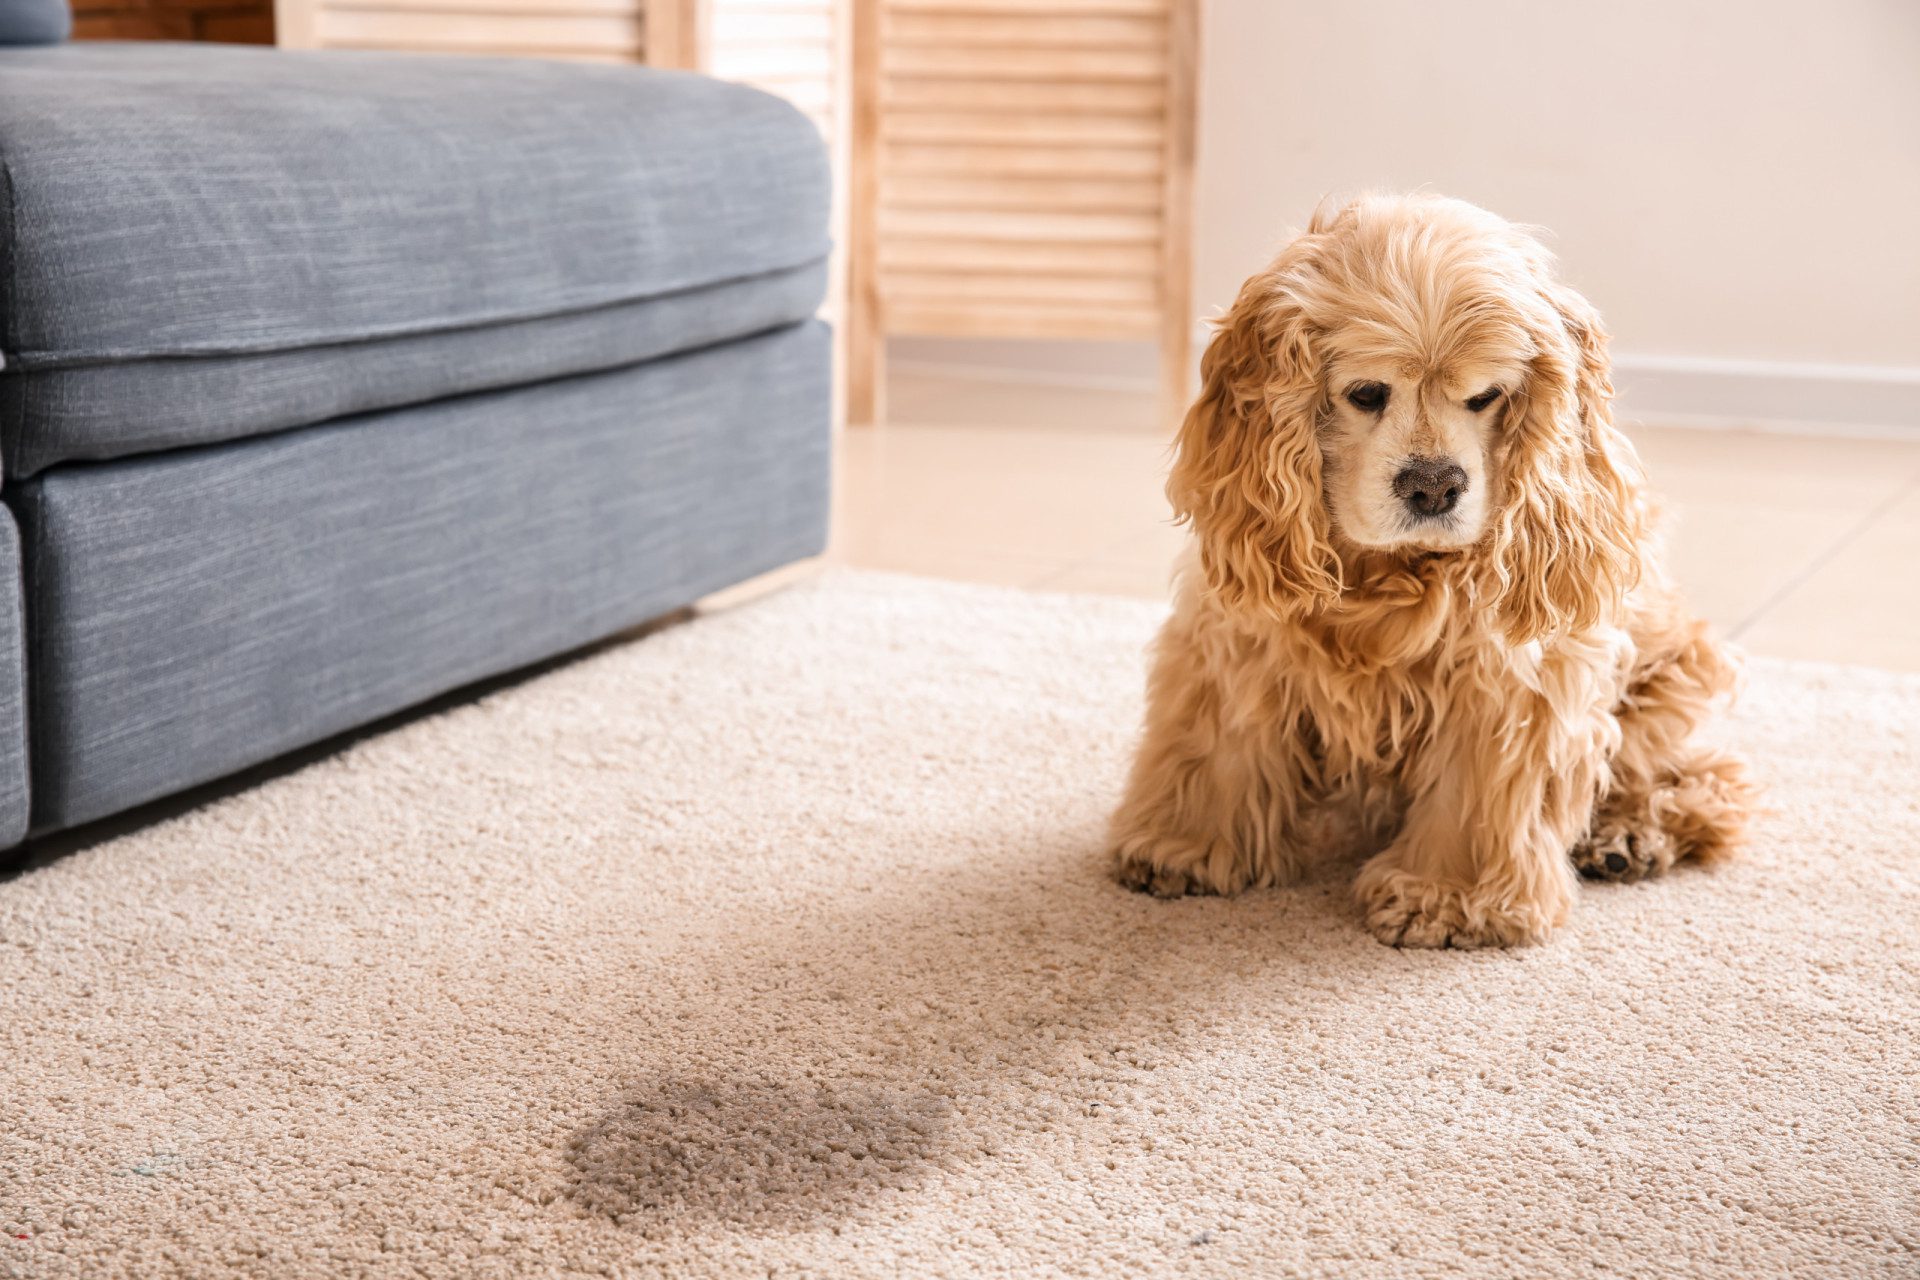 pet urine stain on carpet and a little puppy sitting sad beside this stain.